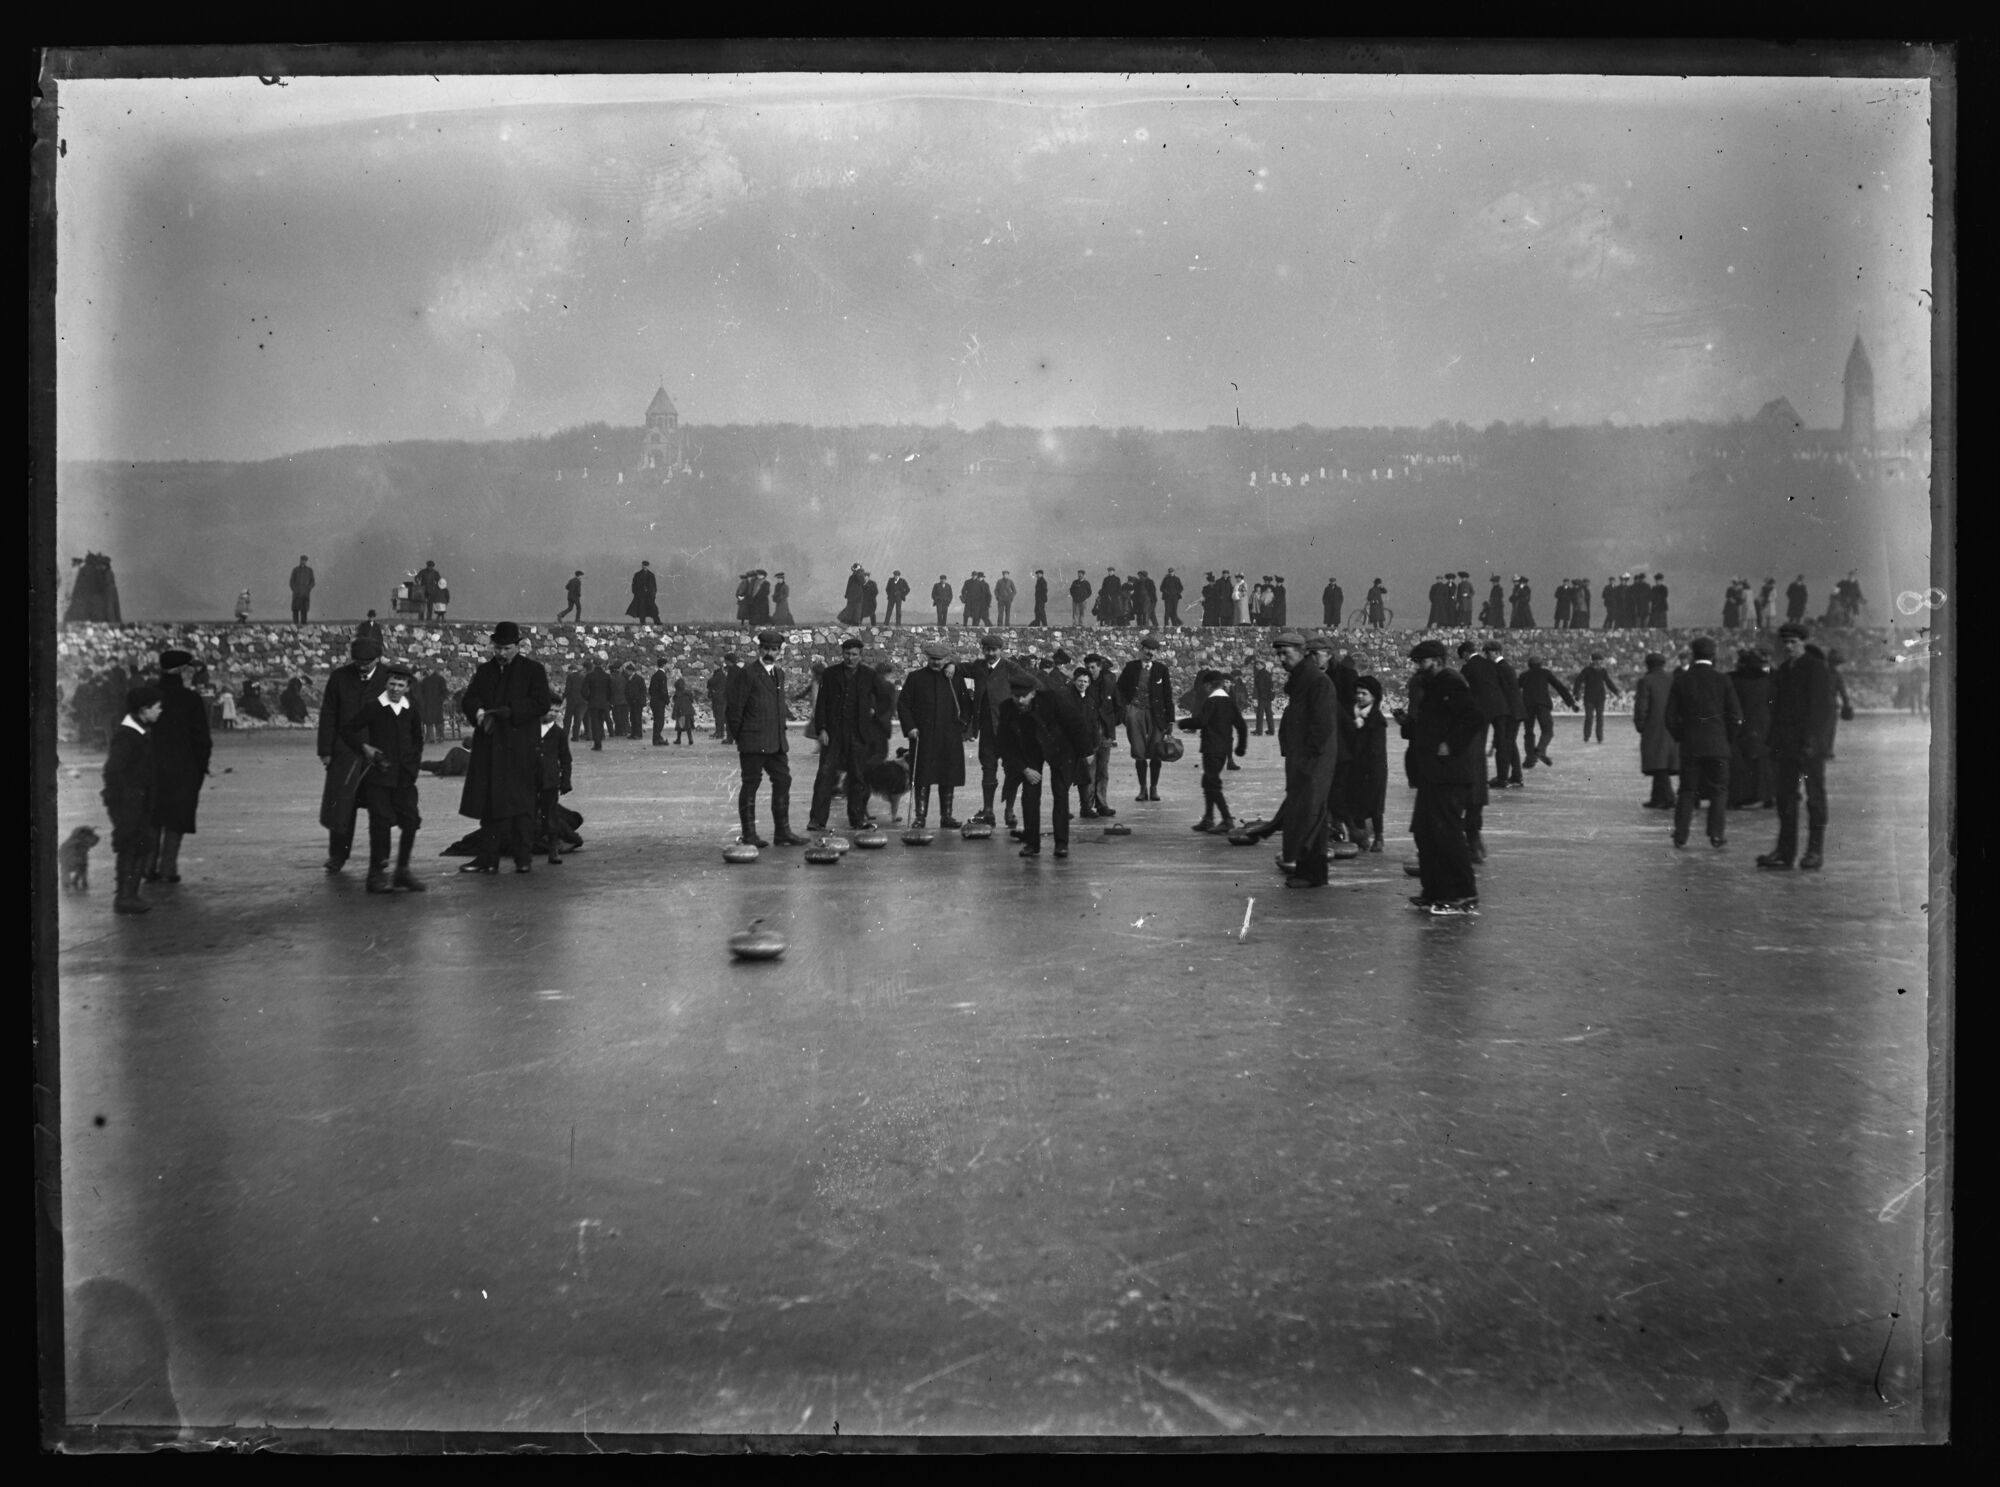 Curling on Ormsgill resevoir, Barrow-in-Furness 